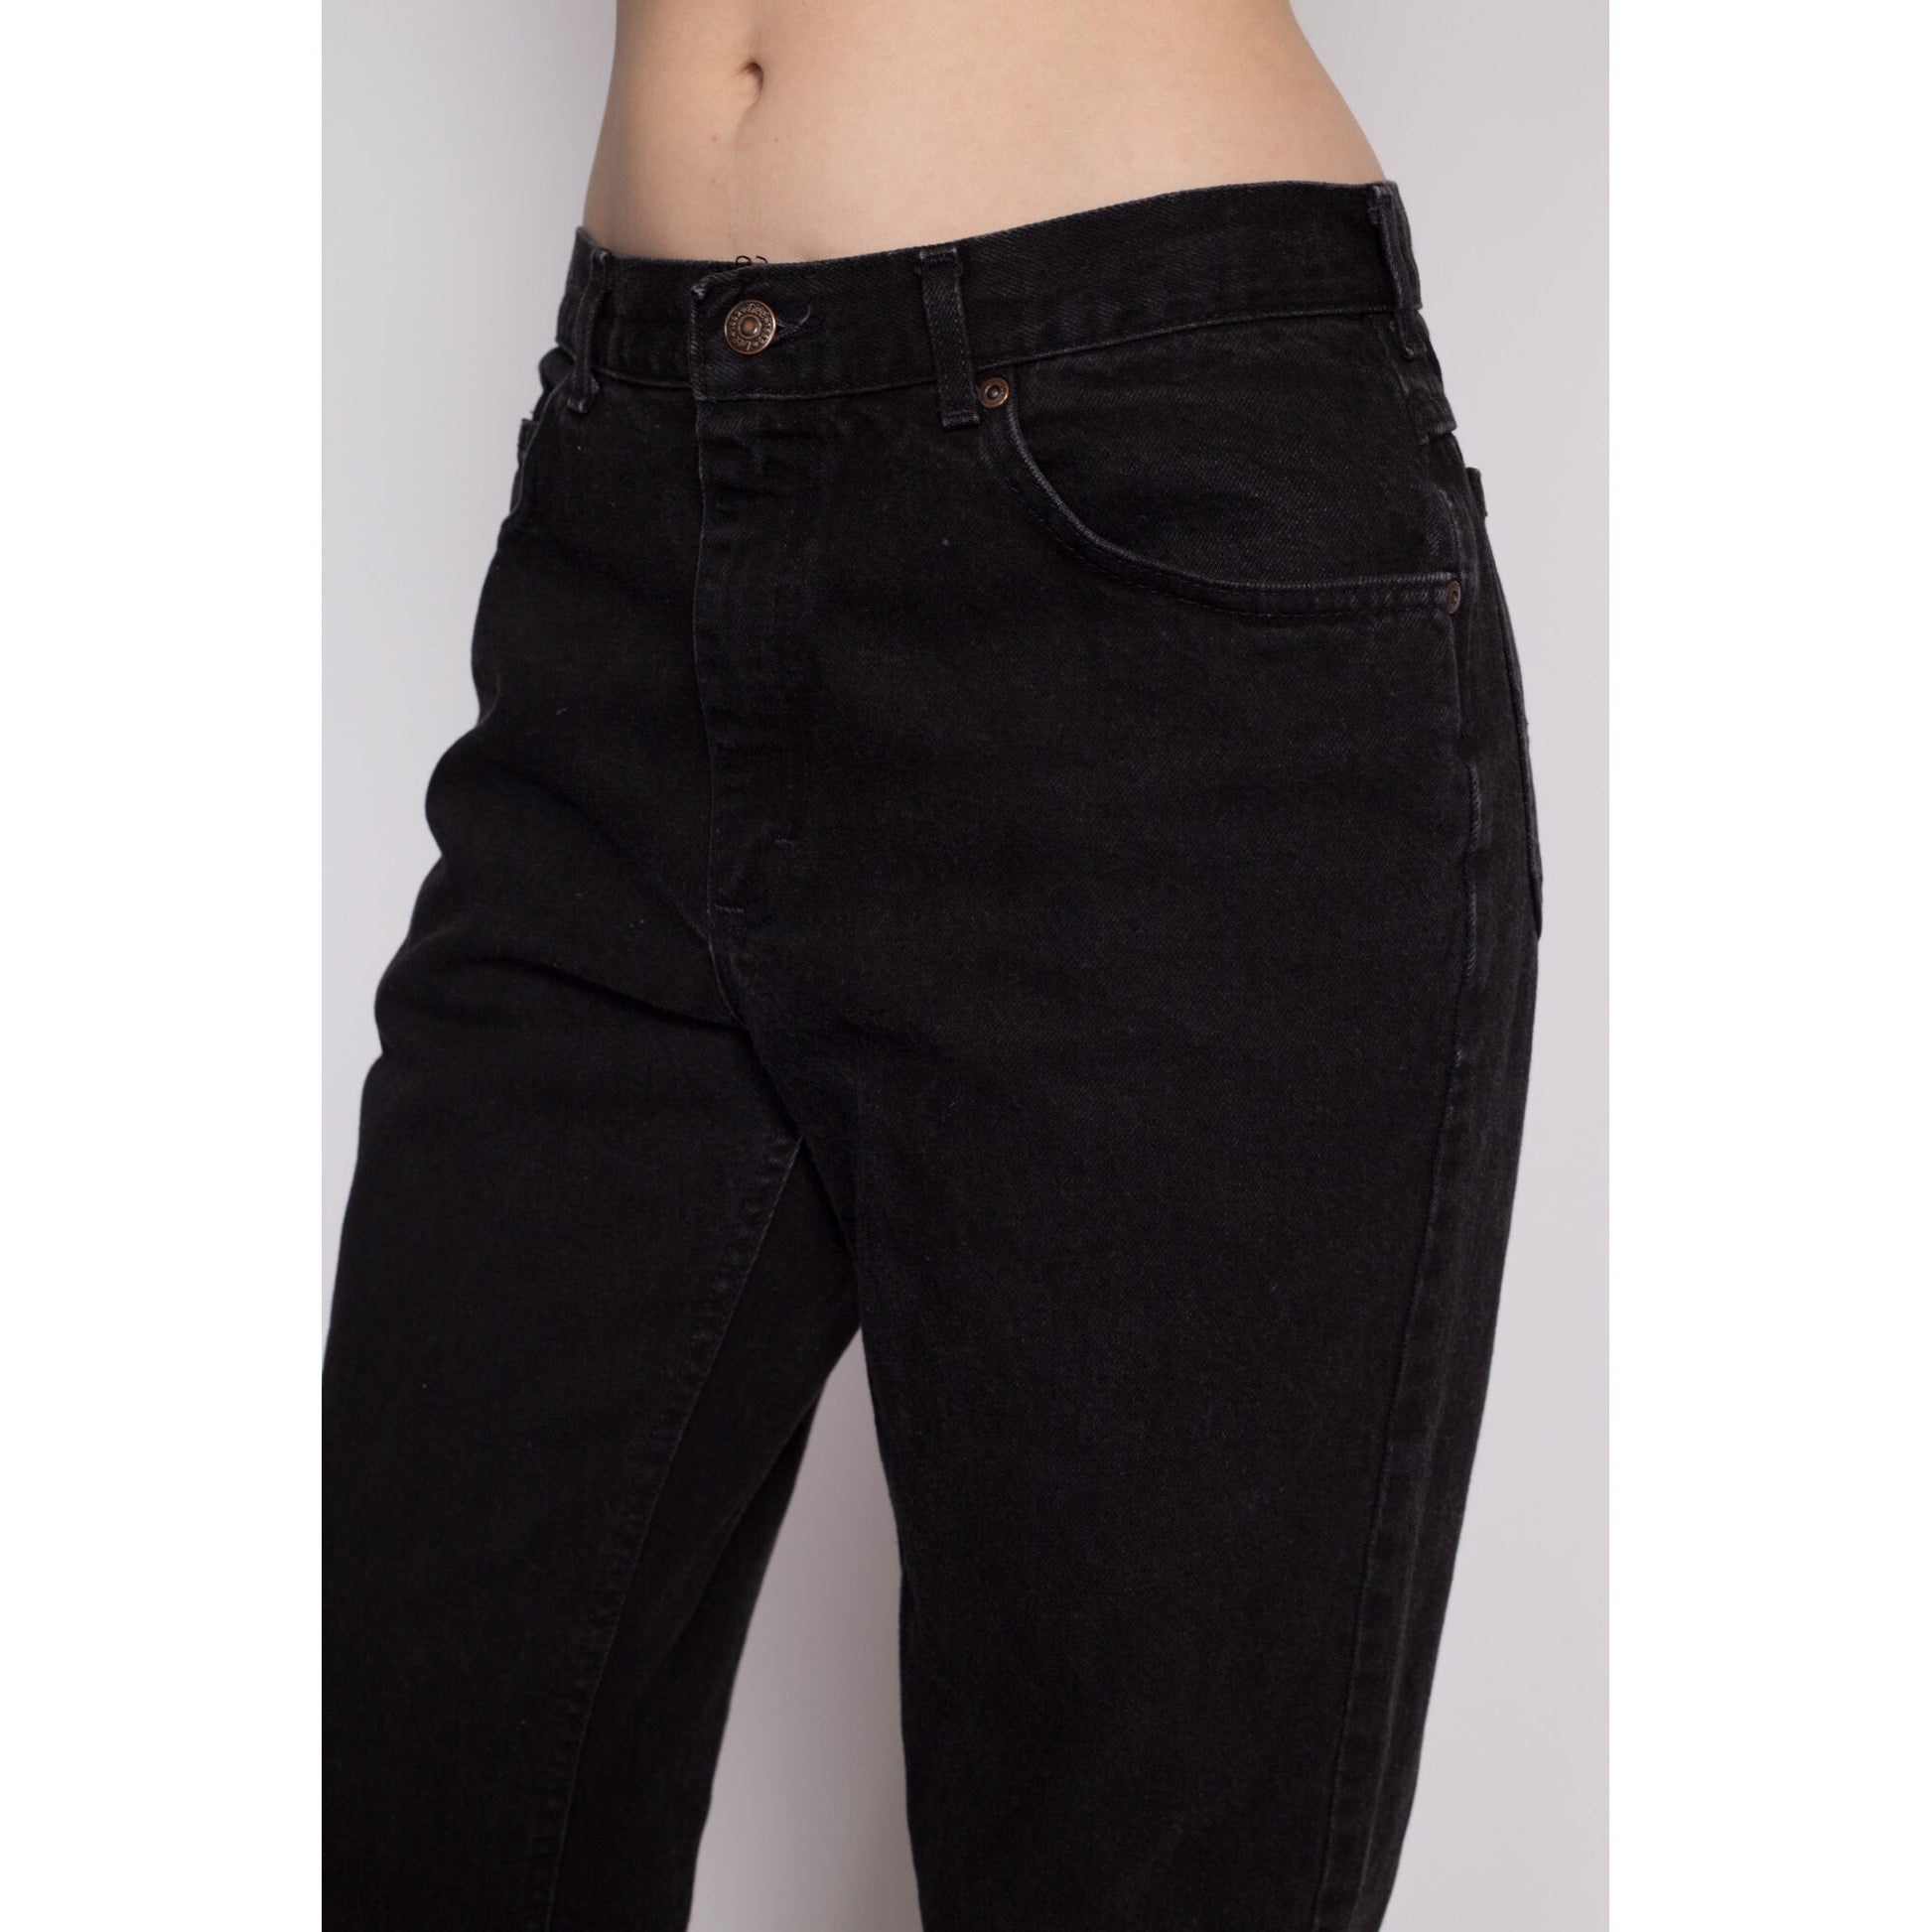 34x32 90s Lee Black Jeans Unisex | Vintage Denim Made In USA High Waisted Tapered Leg Jeans